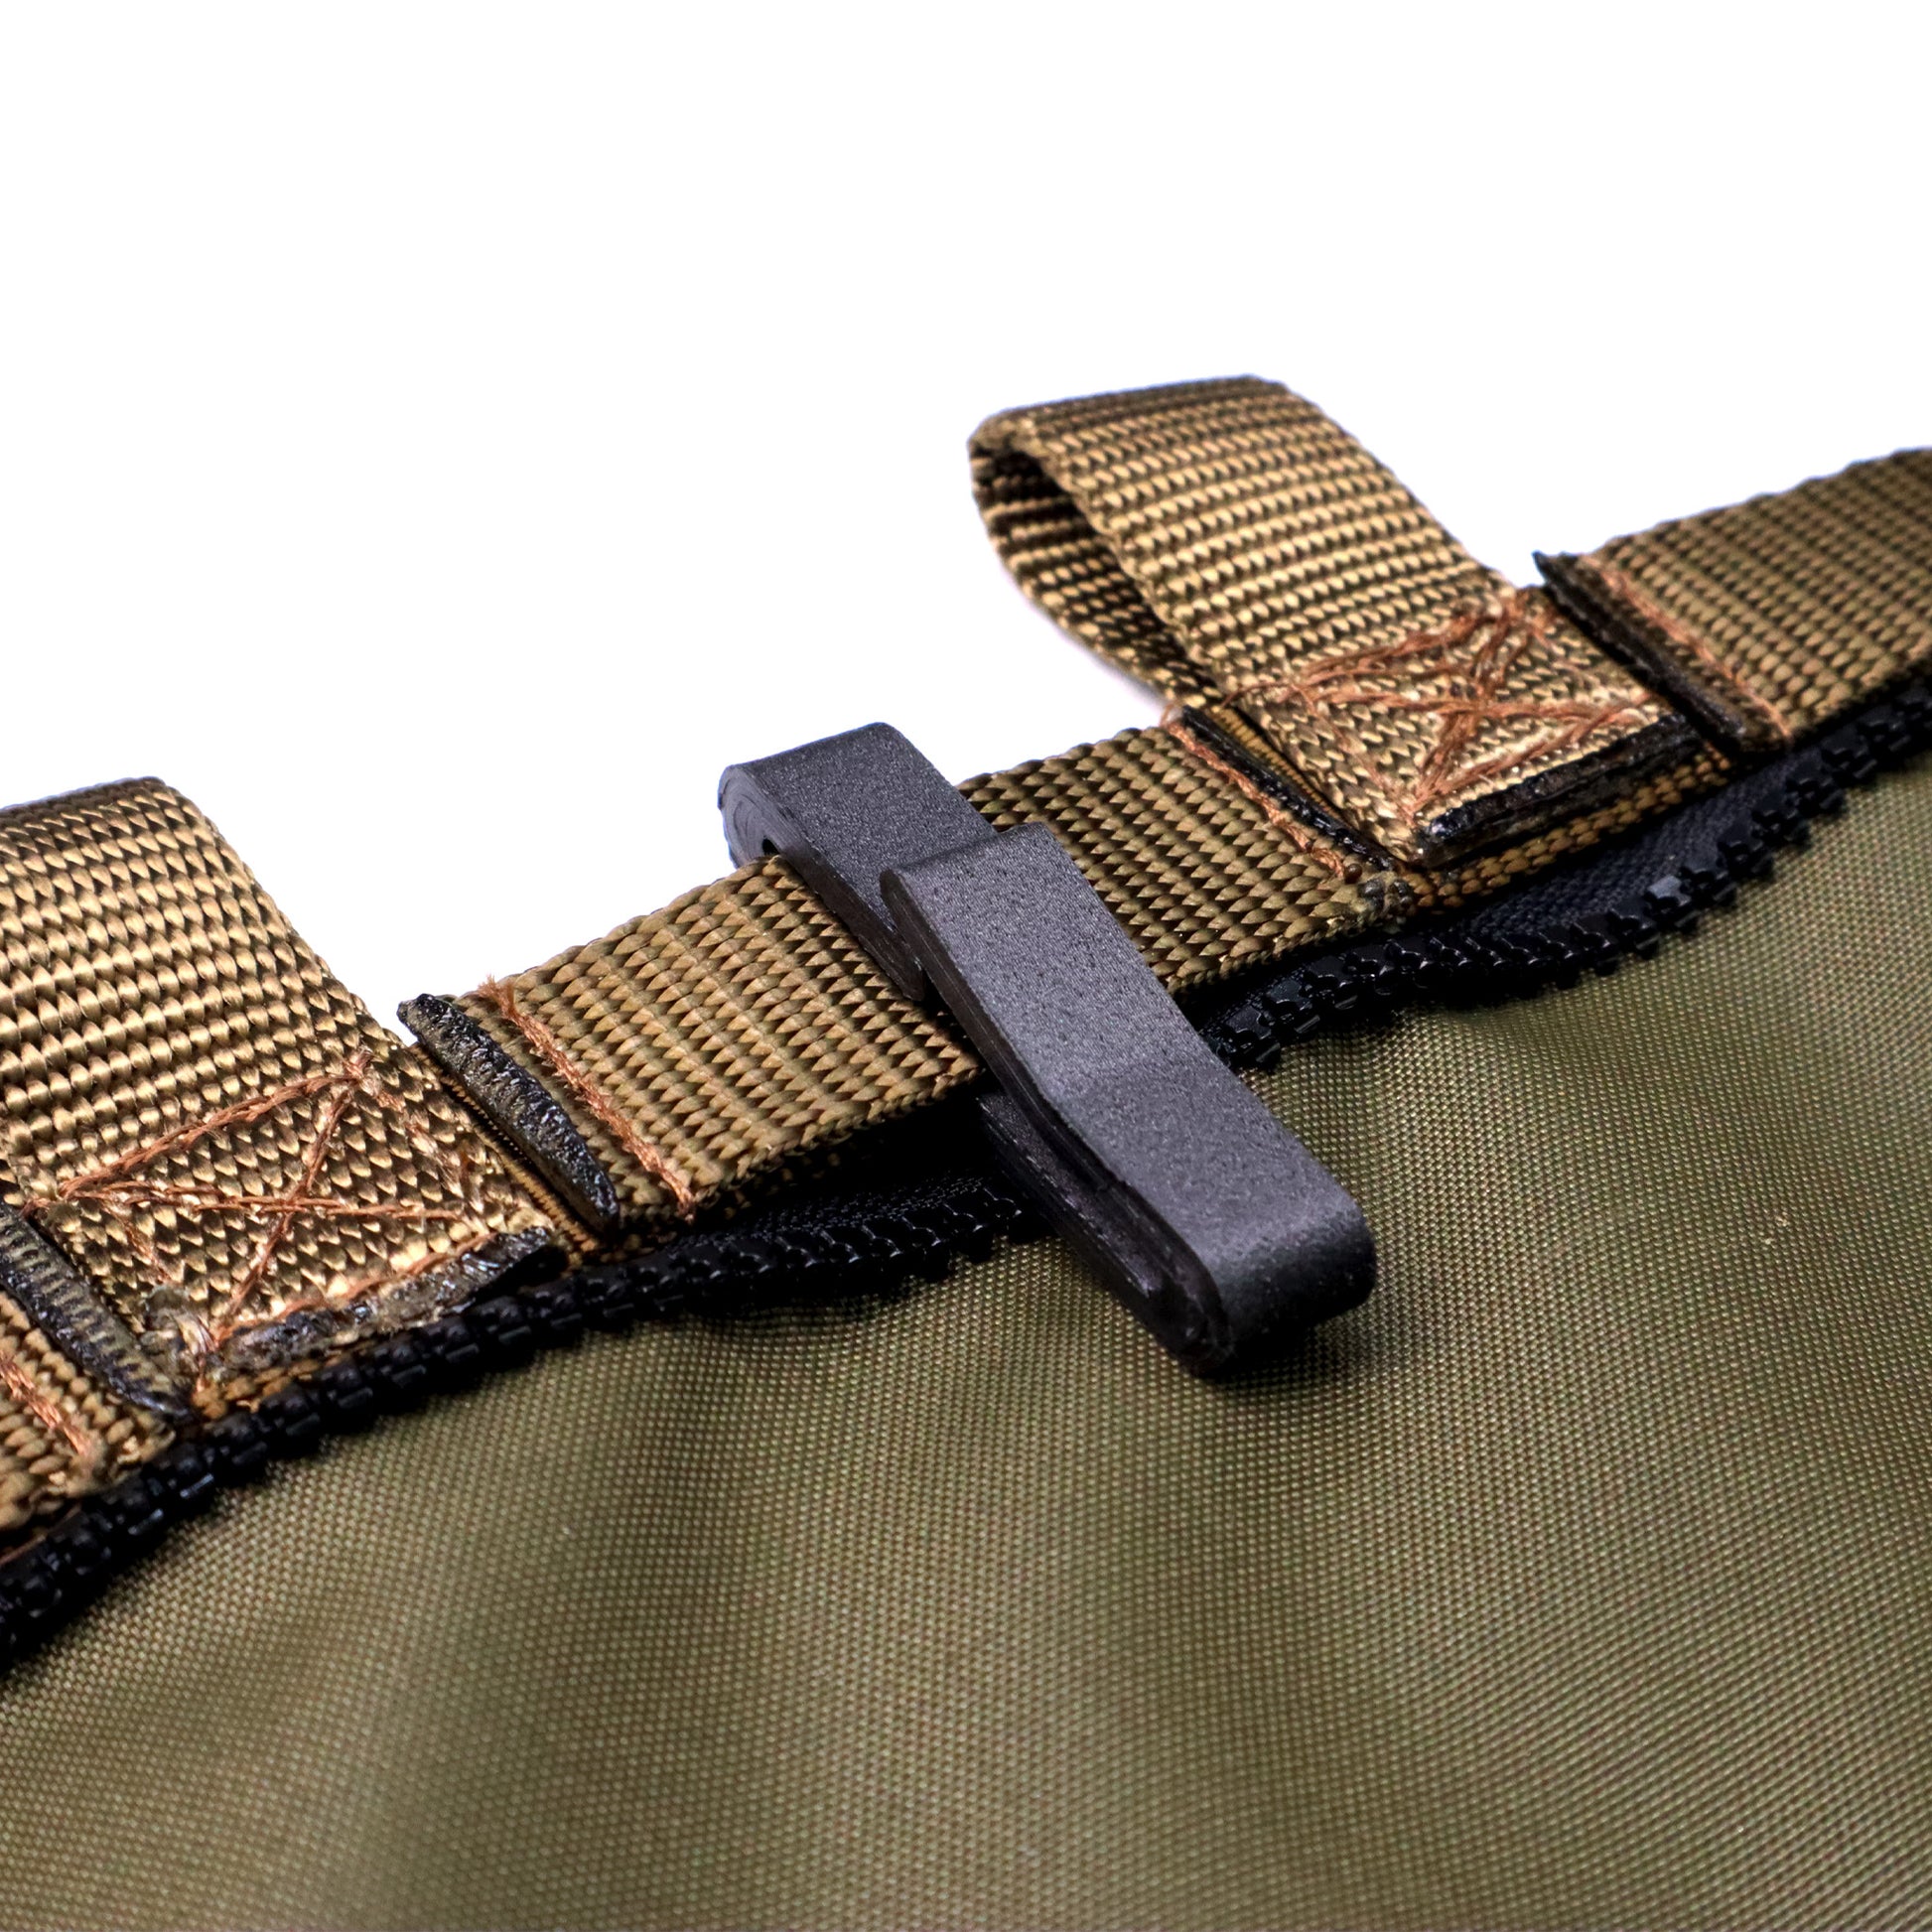 3D Printed Quick Attache Molle Webbing Clip on saddle